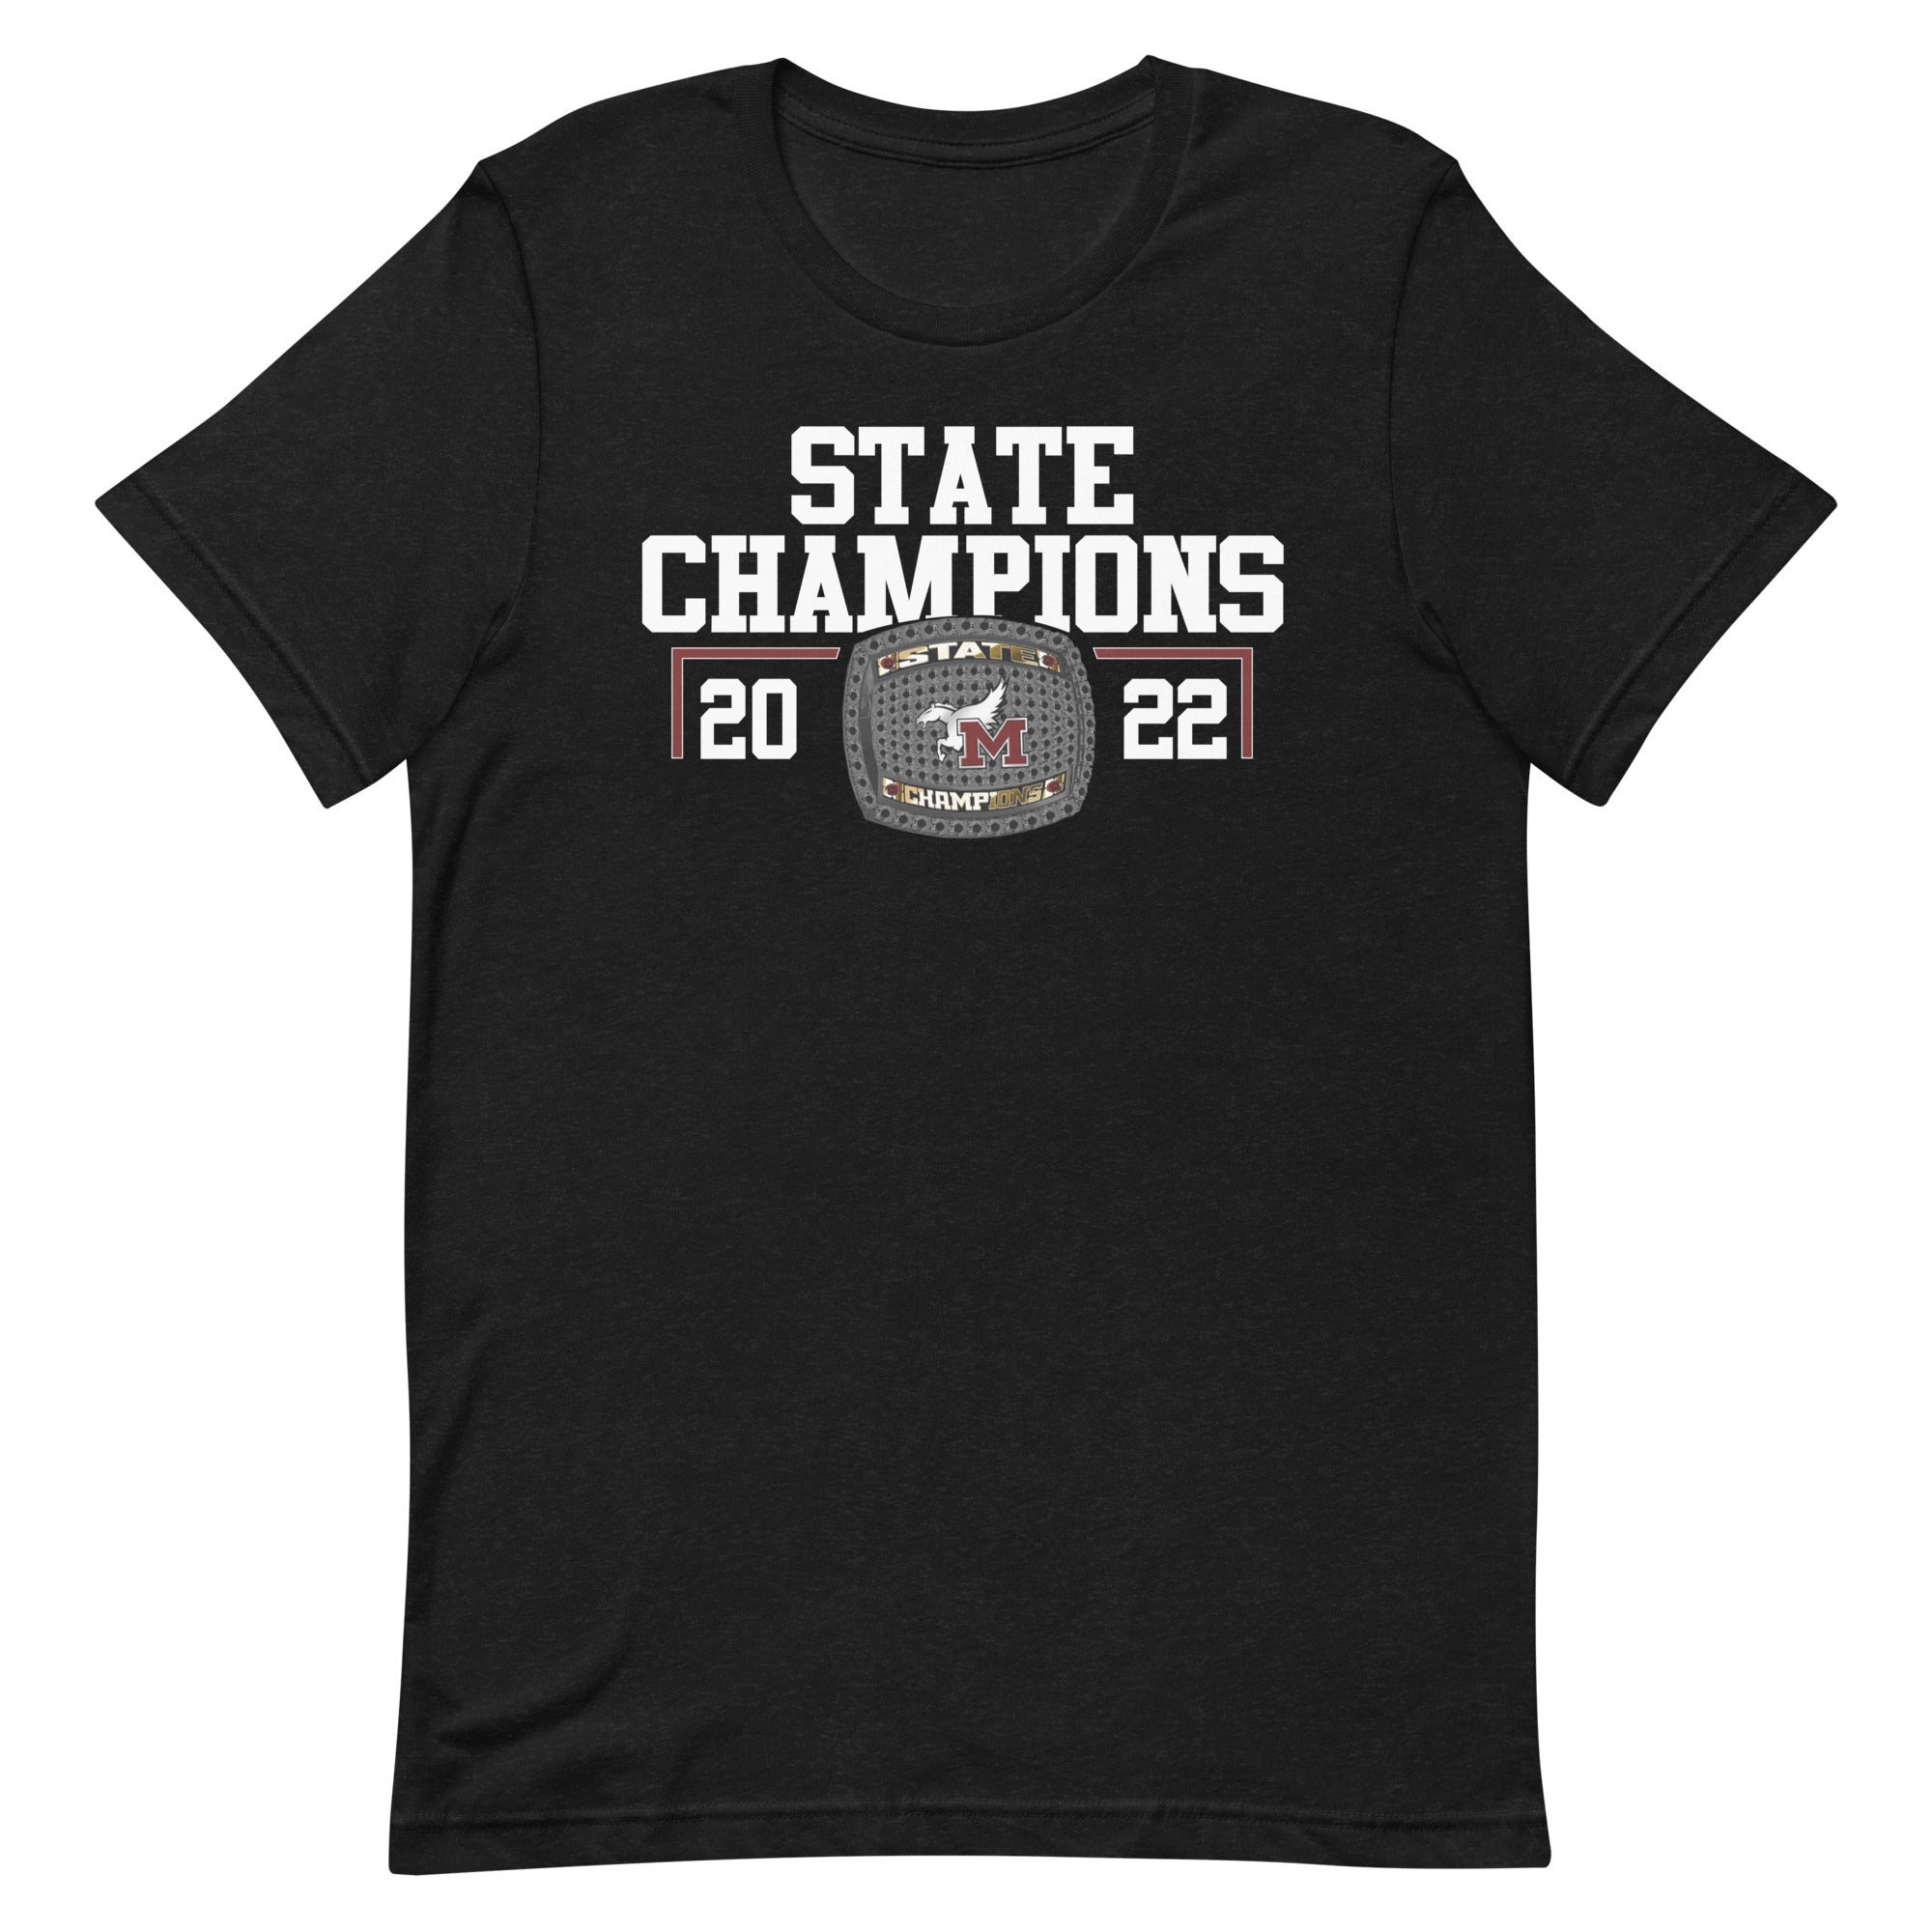 Maryvale Bowling State Champions Unisex t-shirt